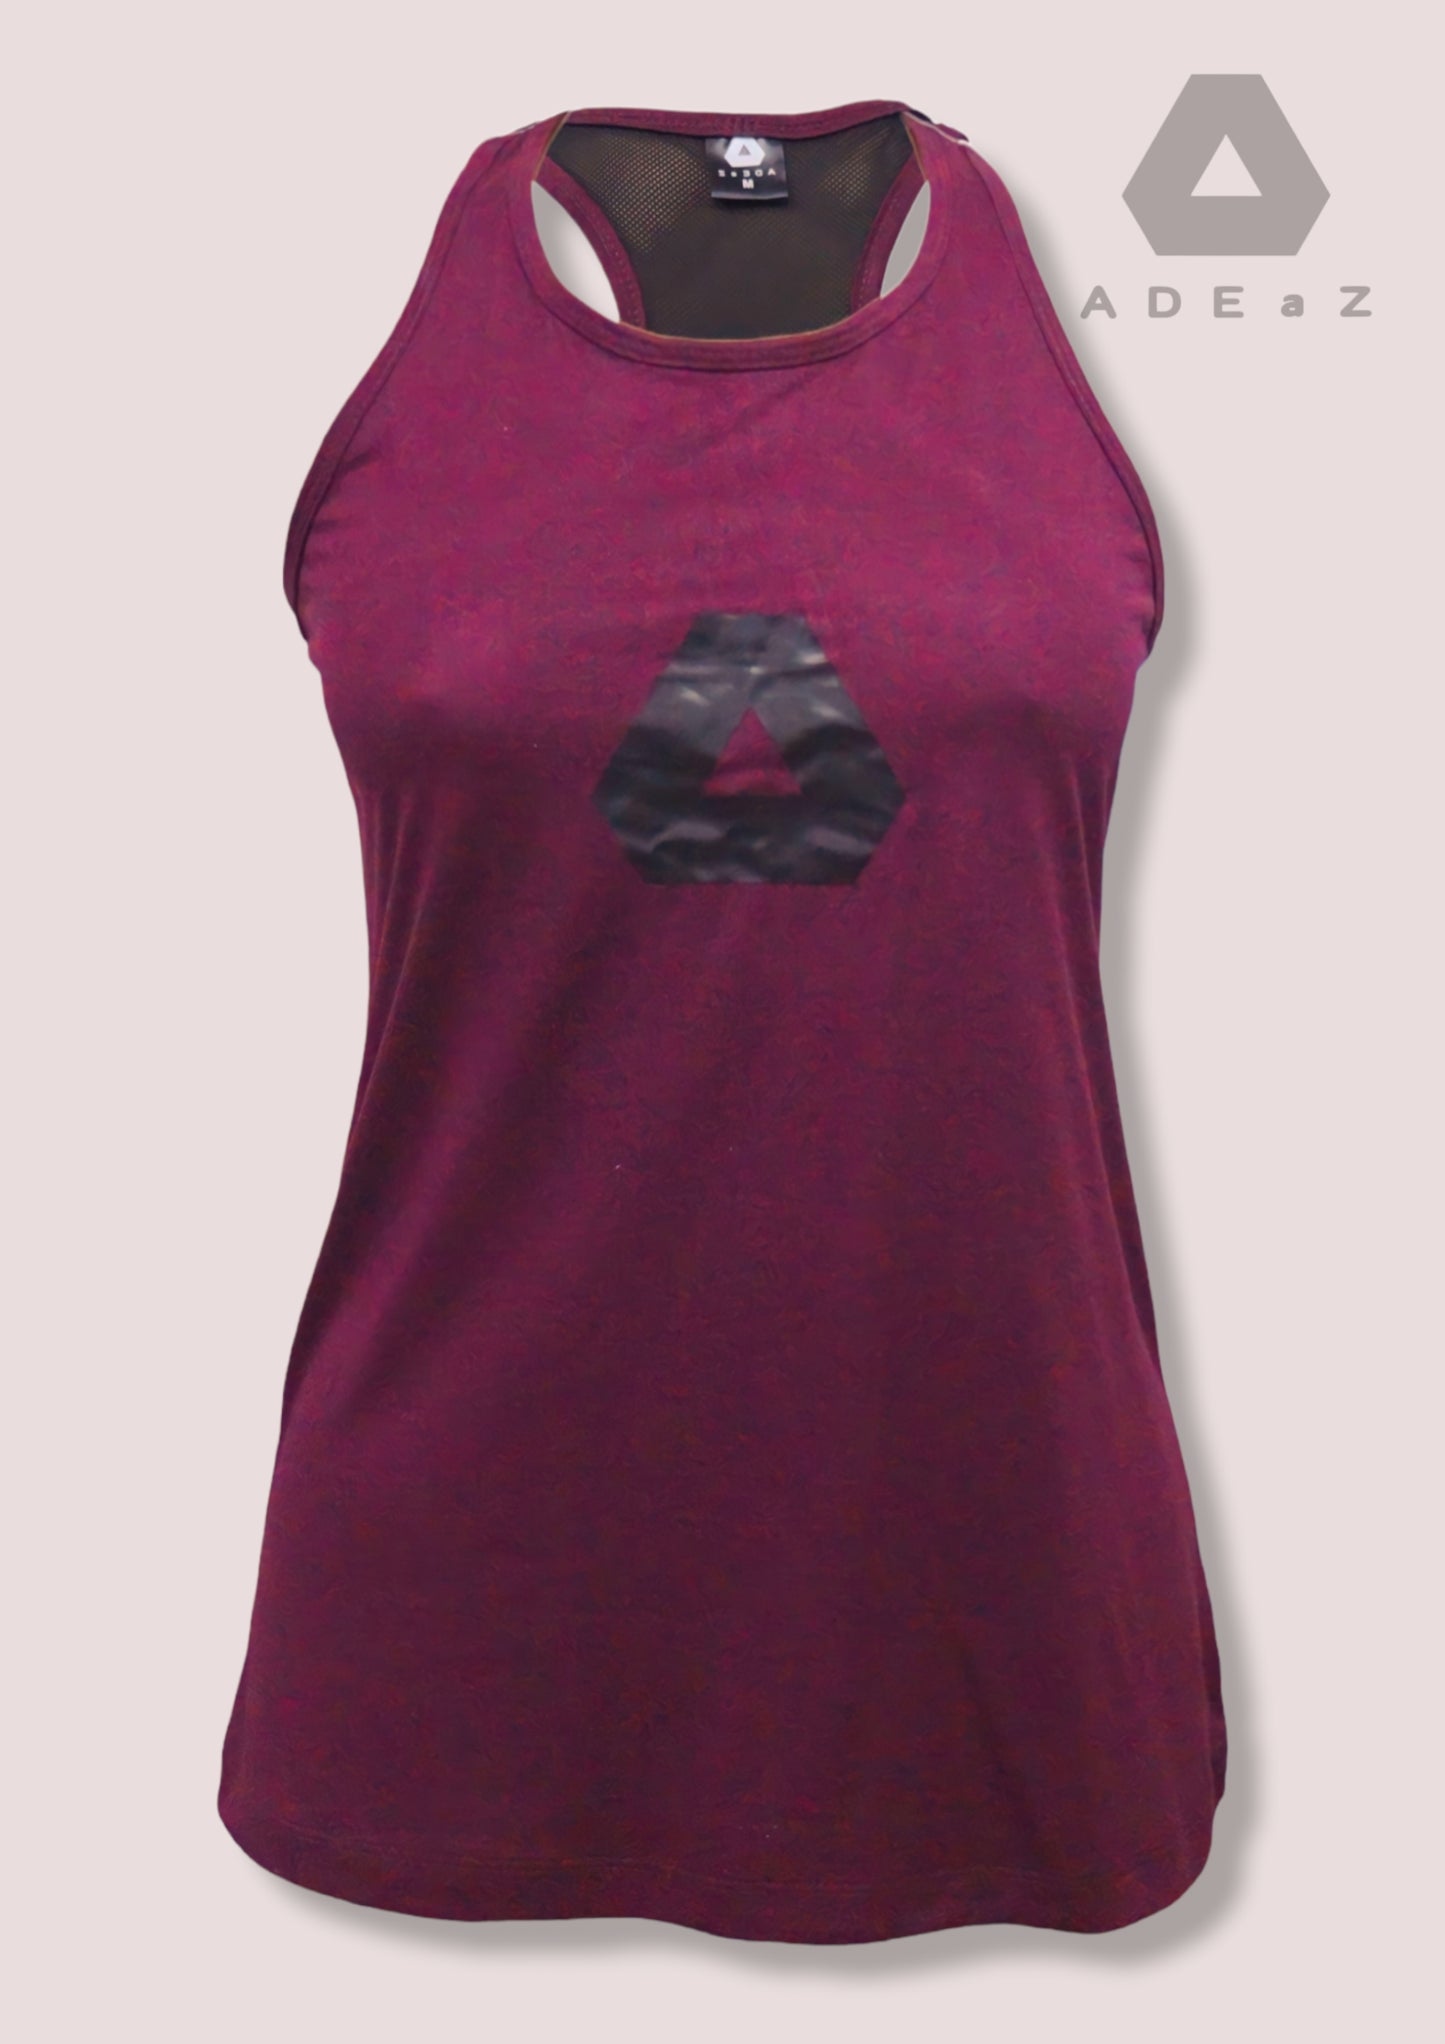 Women's racerback tank top , offering a comfortable fit and sporty style for various occasions.